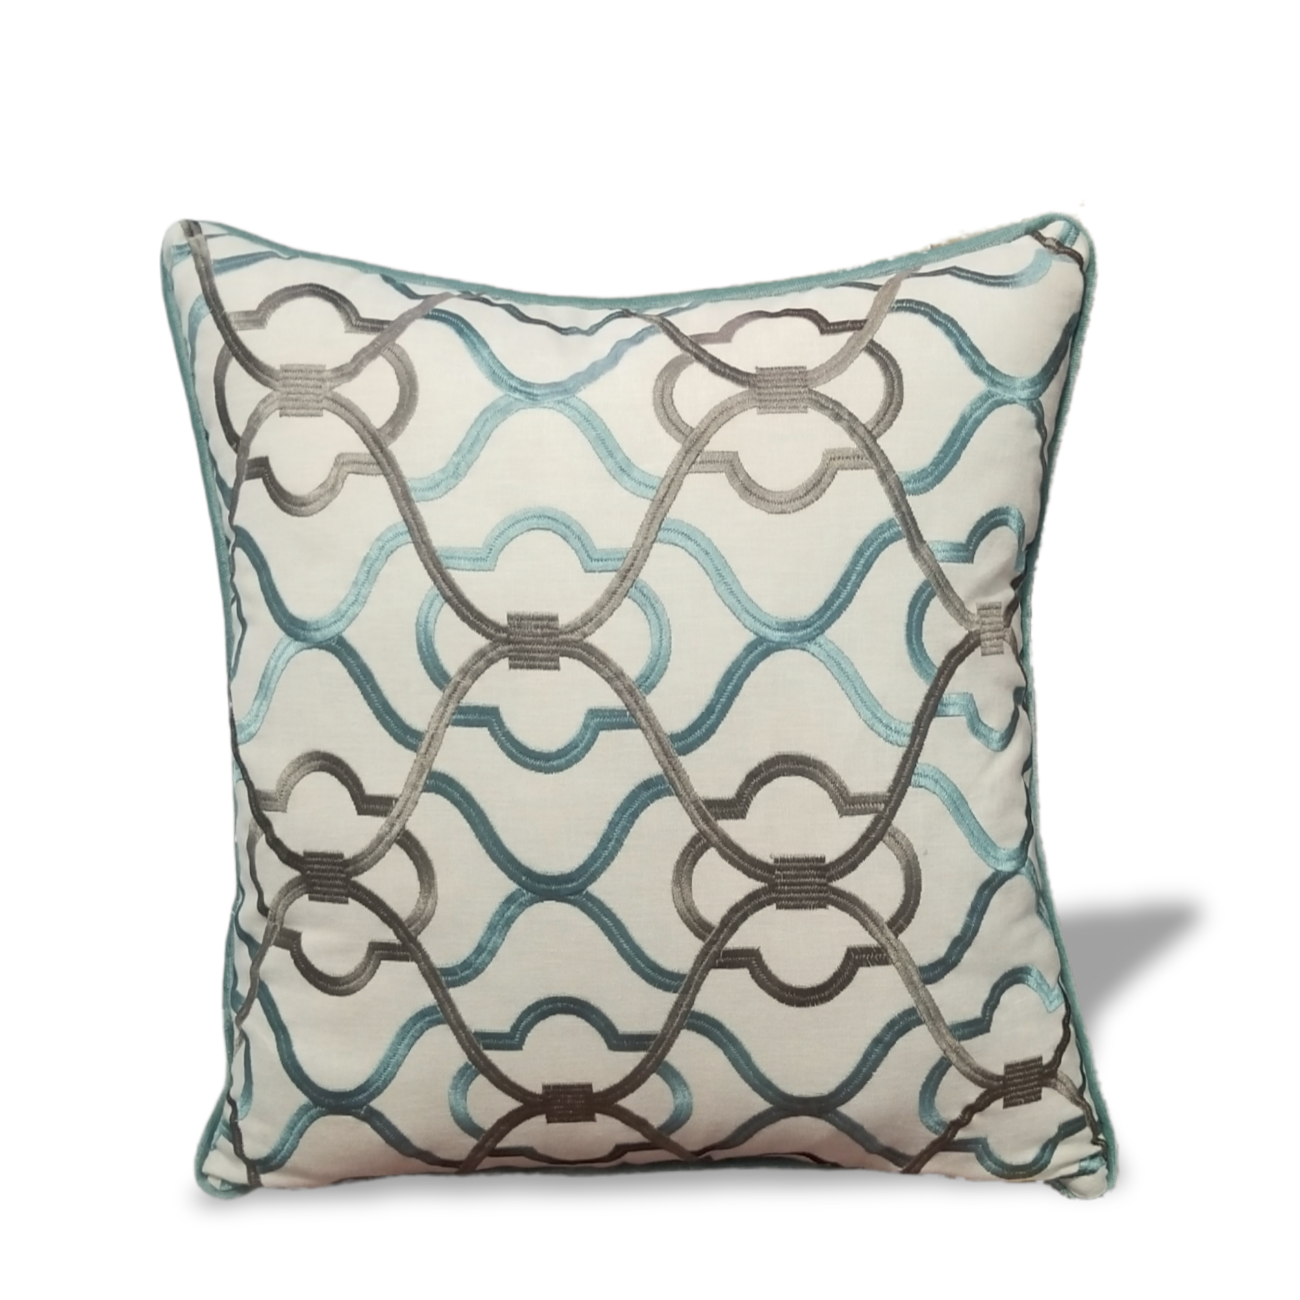 This Luxury Designer Embroidered Throw Pillow is the perfect way to add luxurious style and unique design to any room! Handcrafted from Fabricut Passarella Plume Embroidered Fabric, this cushion cover features a velvet backing and captivating aqua and brown hues. An opulent Fiona Kimberly Design - this high-end cushion cover is a sophisticated statement piece that will elevate any home. Get it now and experience luxury living!